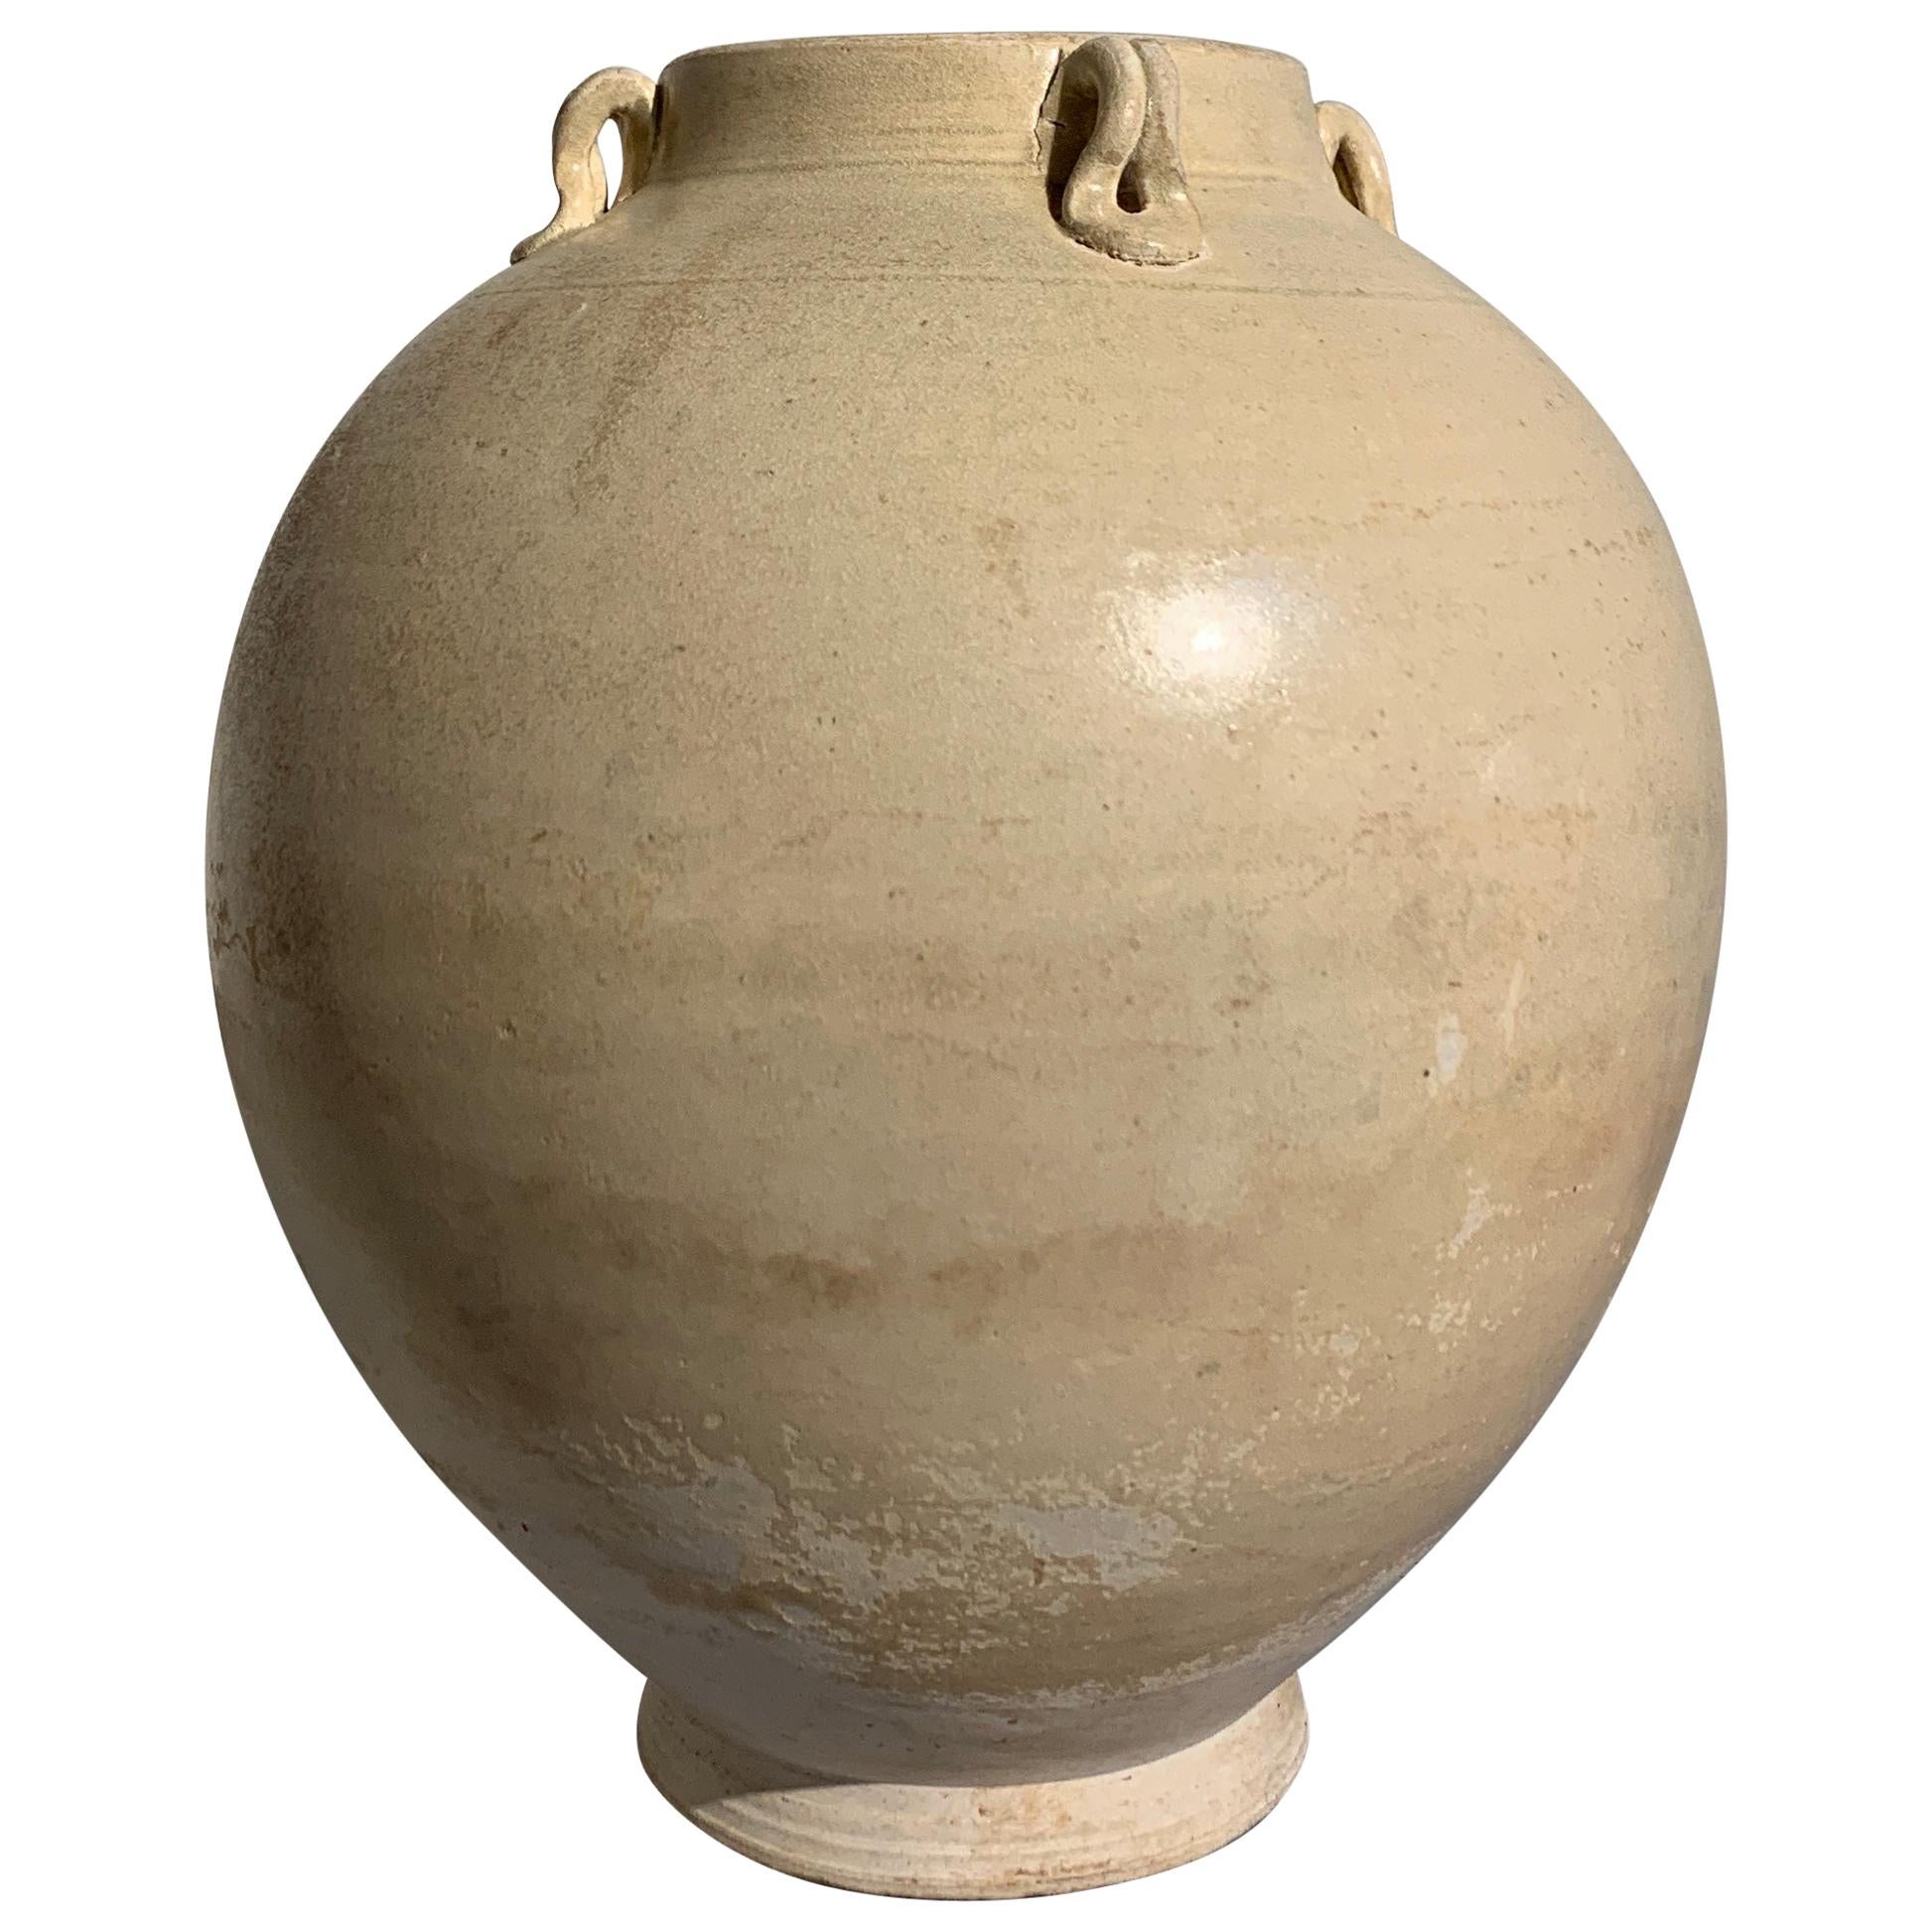 Chinese Sui Dynasty White Glazed Jar with Loop Handles, 6th-7th Century